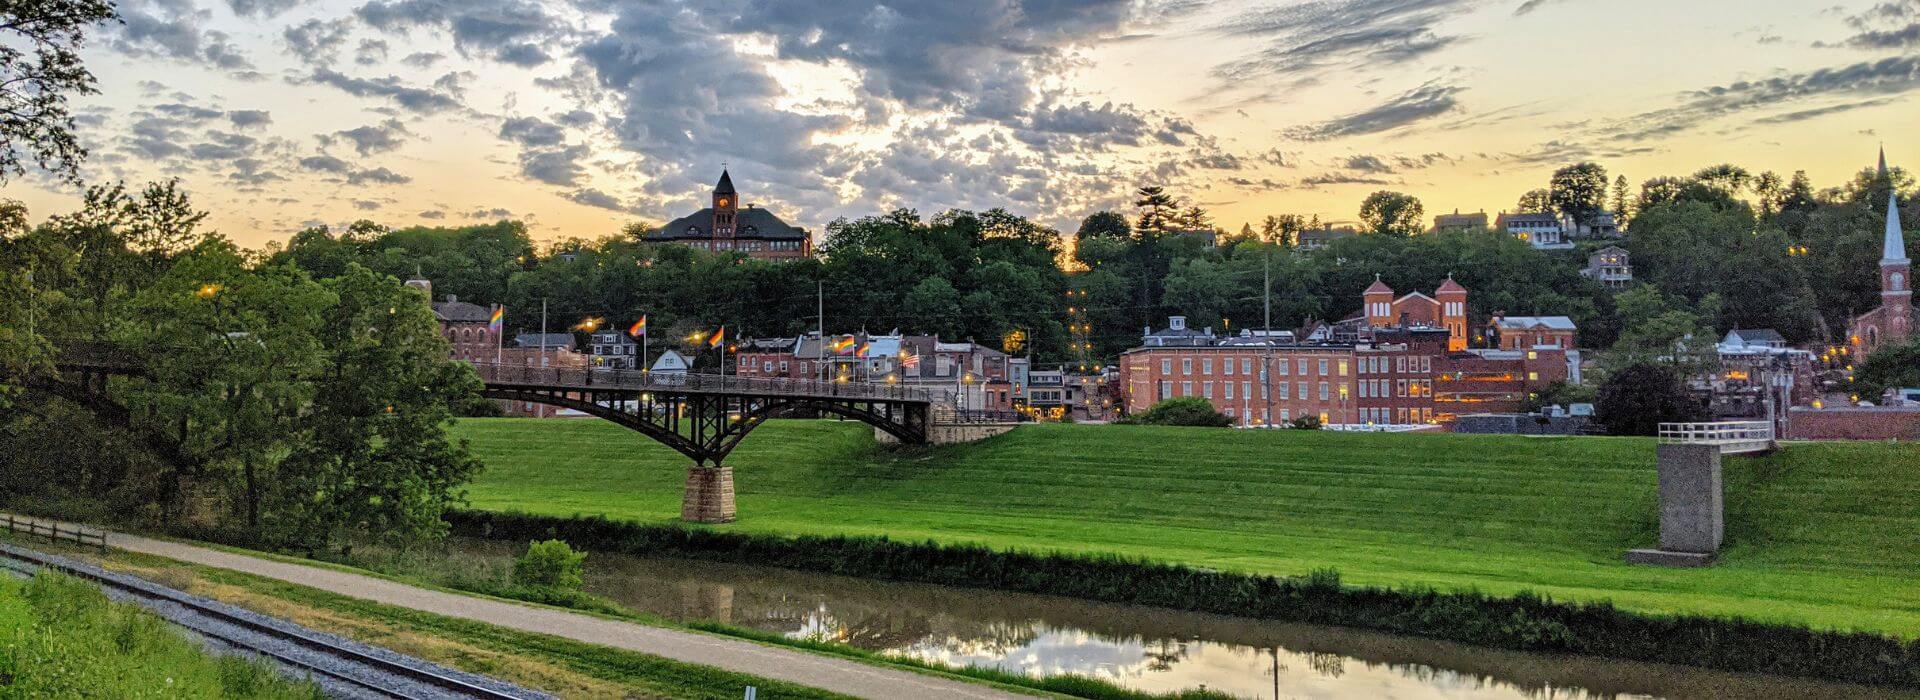 Outdoor picture of a river, green grass, a bridge, brick buildings, and green trees.